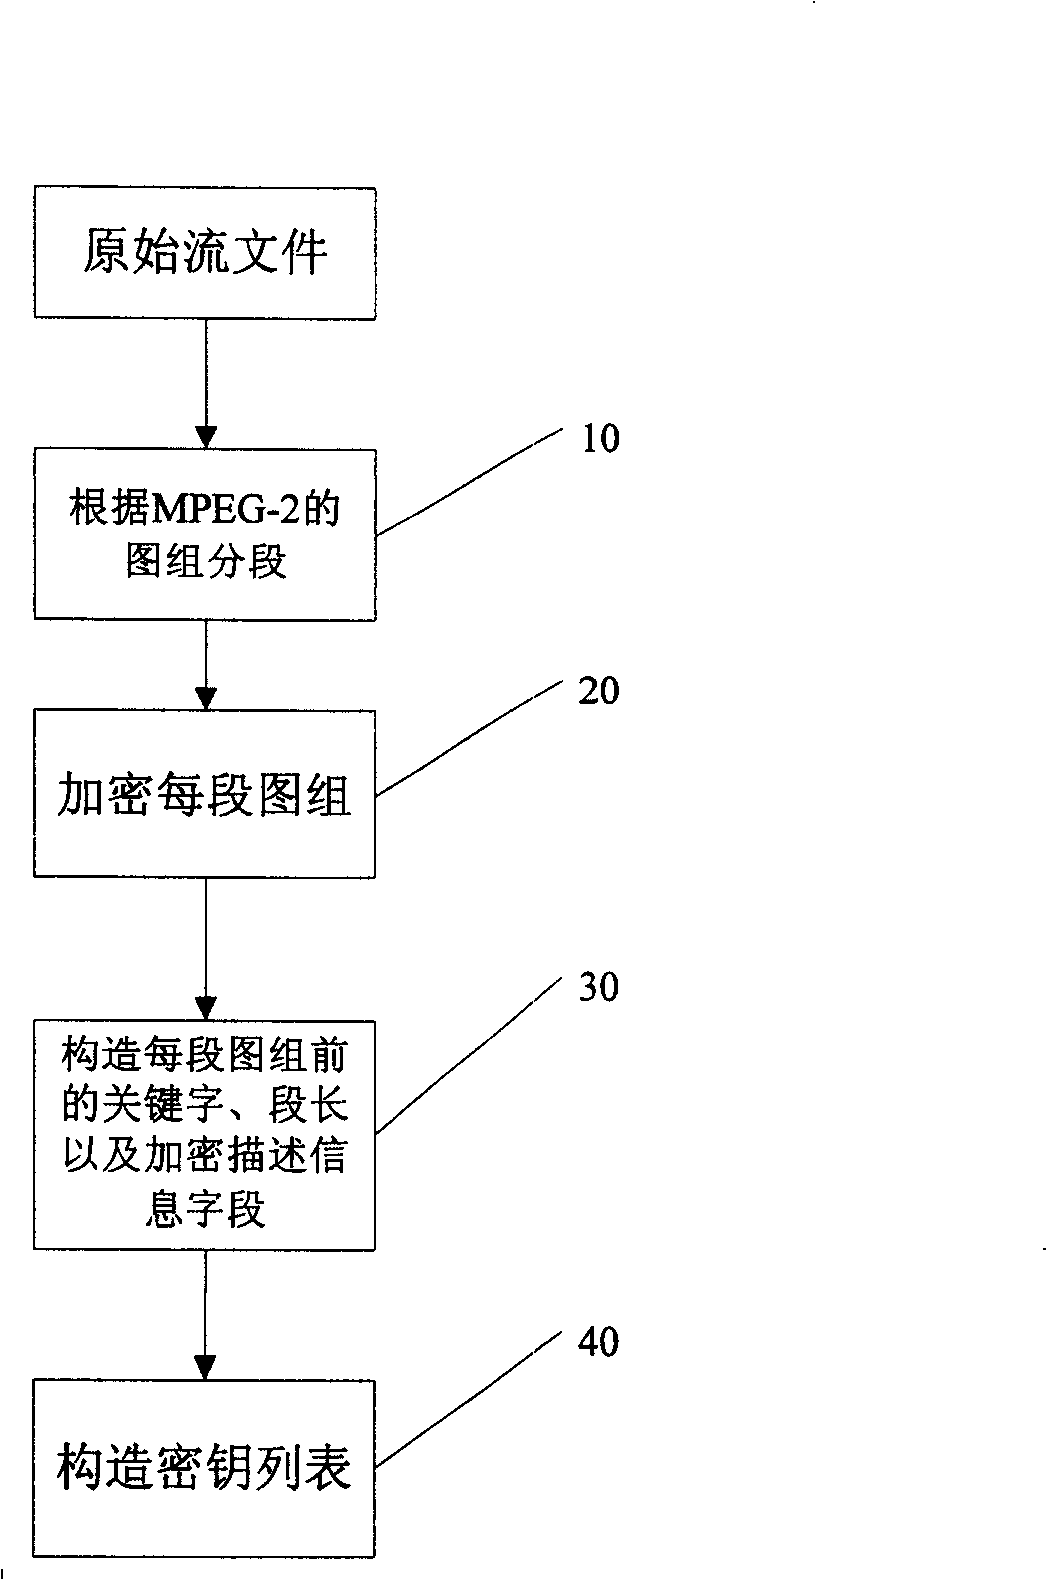 File enciphering method and enciphered file structure in digital media broadcasting system